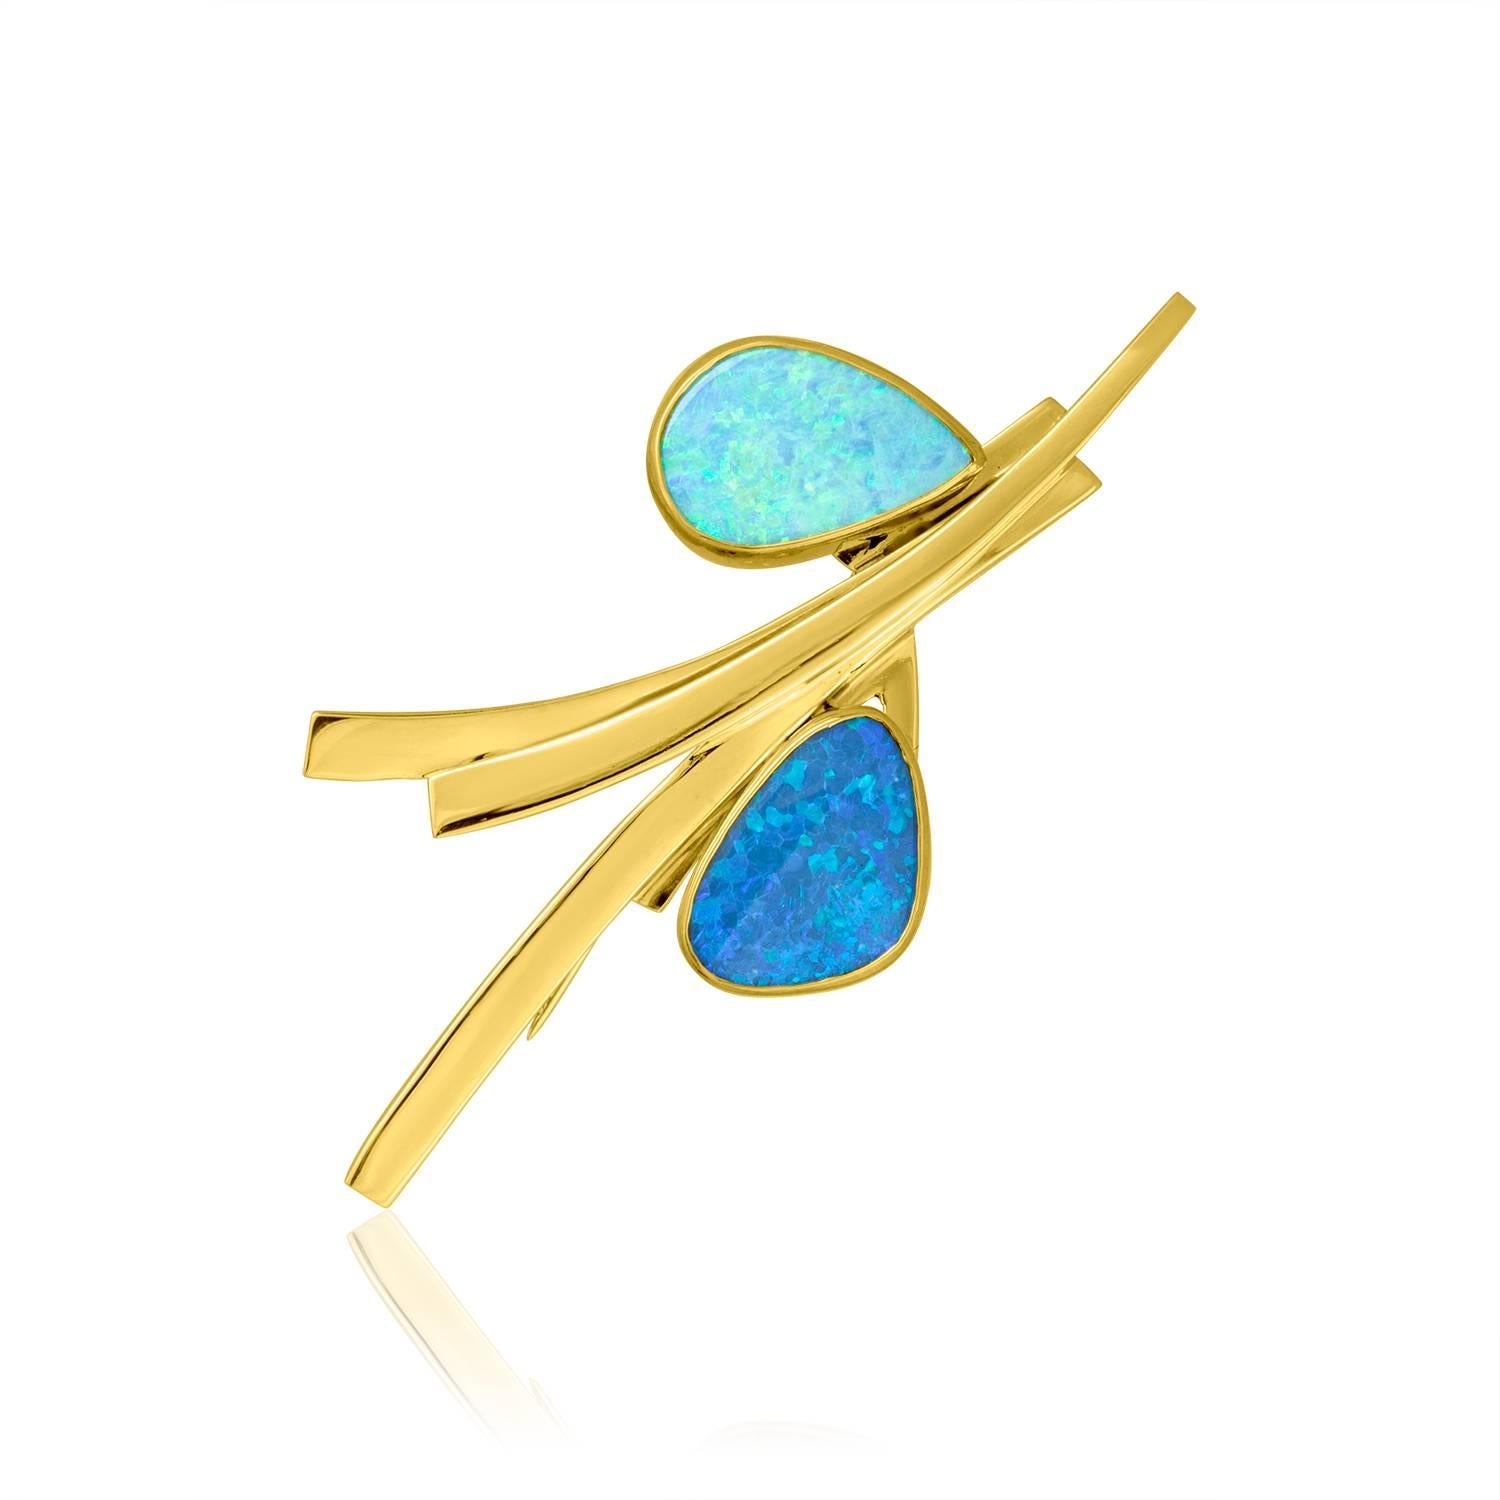 Very Beautiful Opal Pin.
The opal is Australian set in 14K Yellow Gold.
There are approximately 15.00Ct in Opal.
The pin measures 3